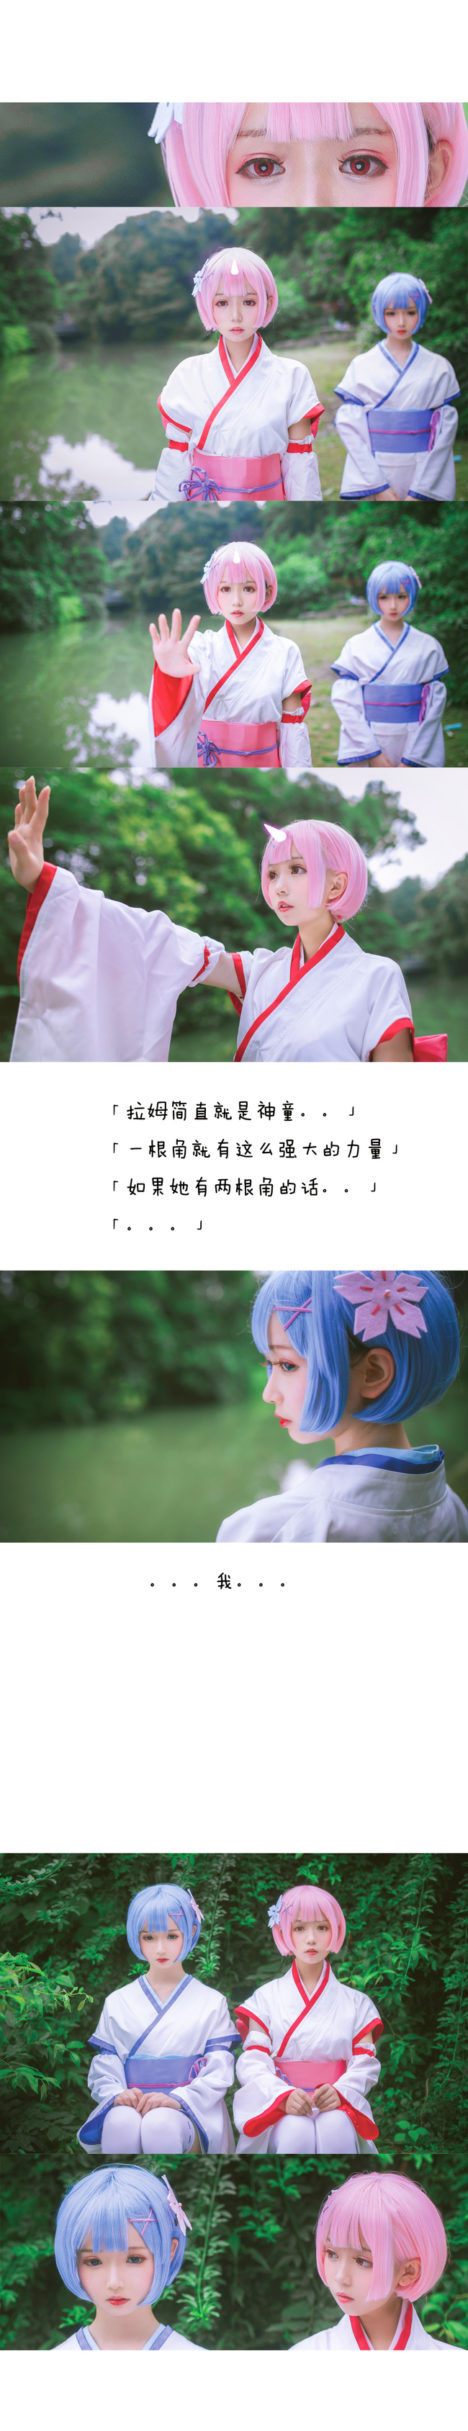 Young-Rem-Ram-Cosplay-2